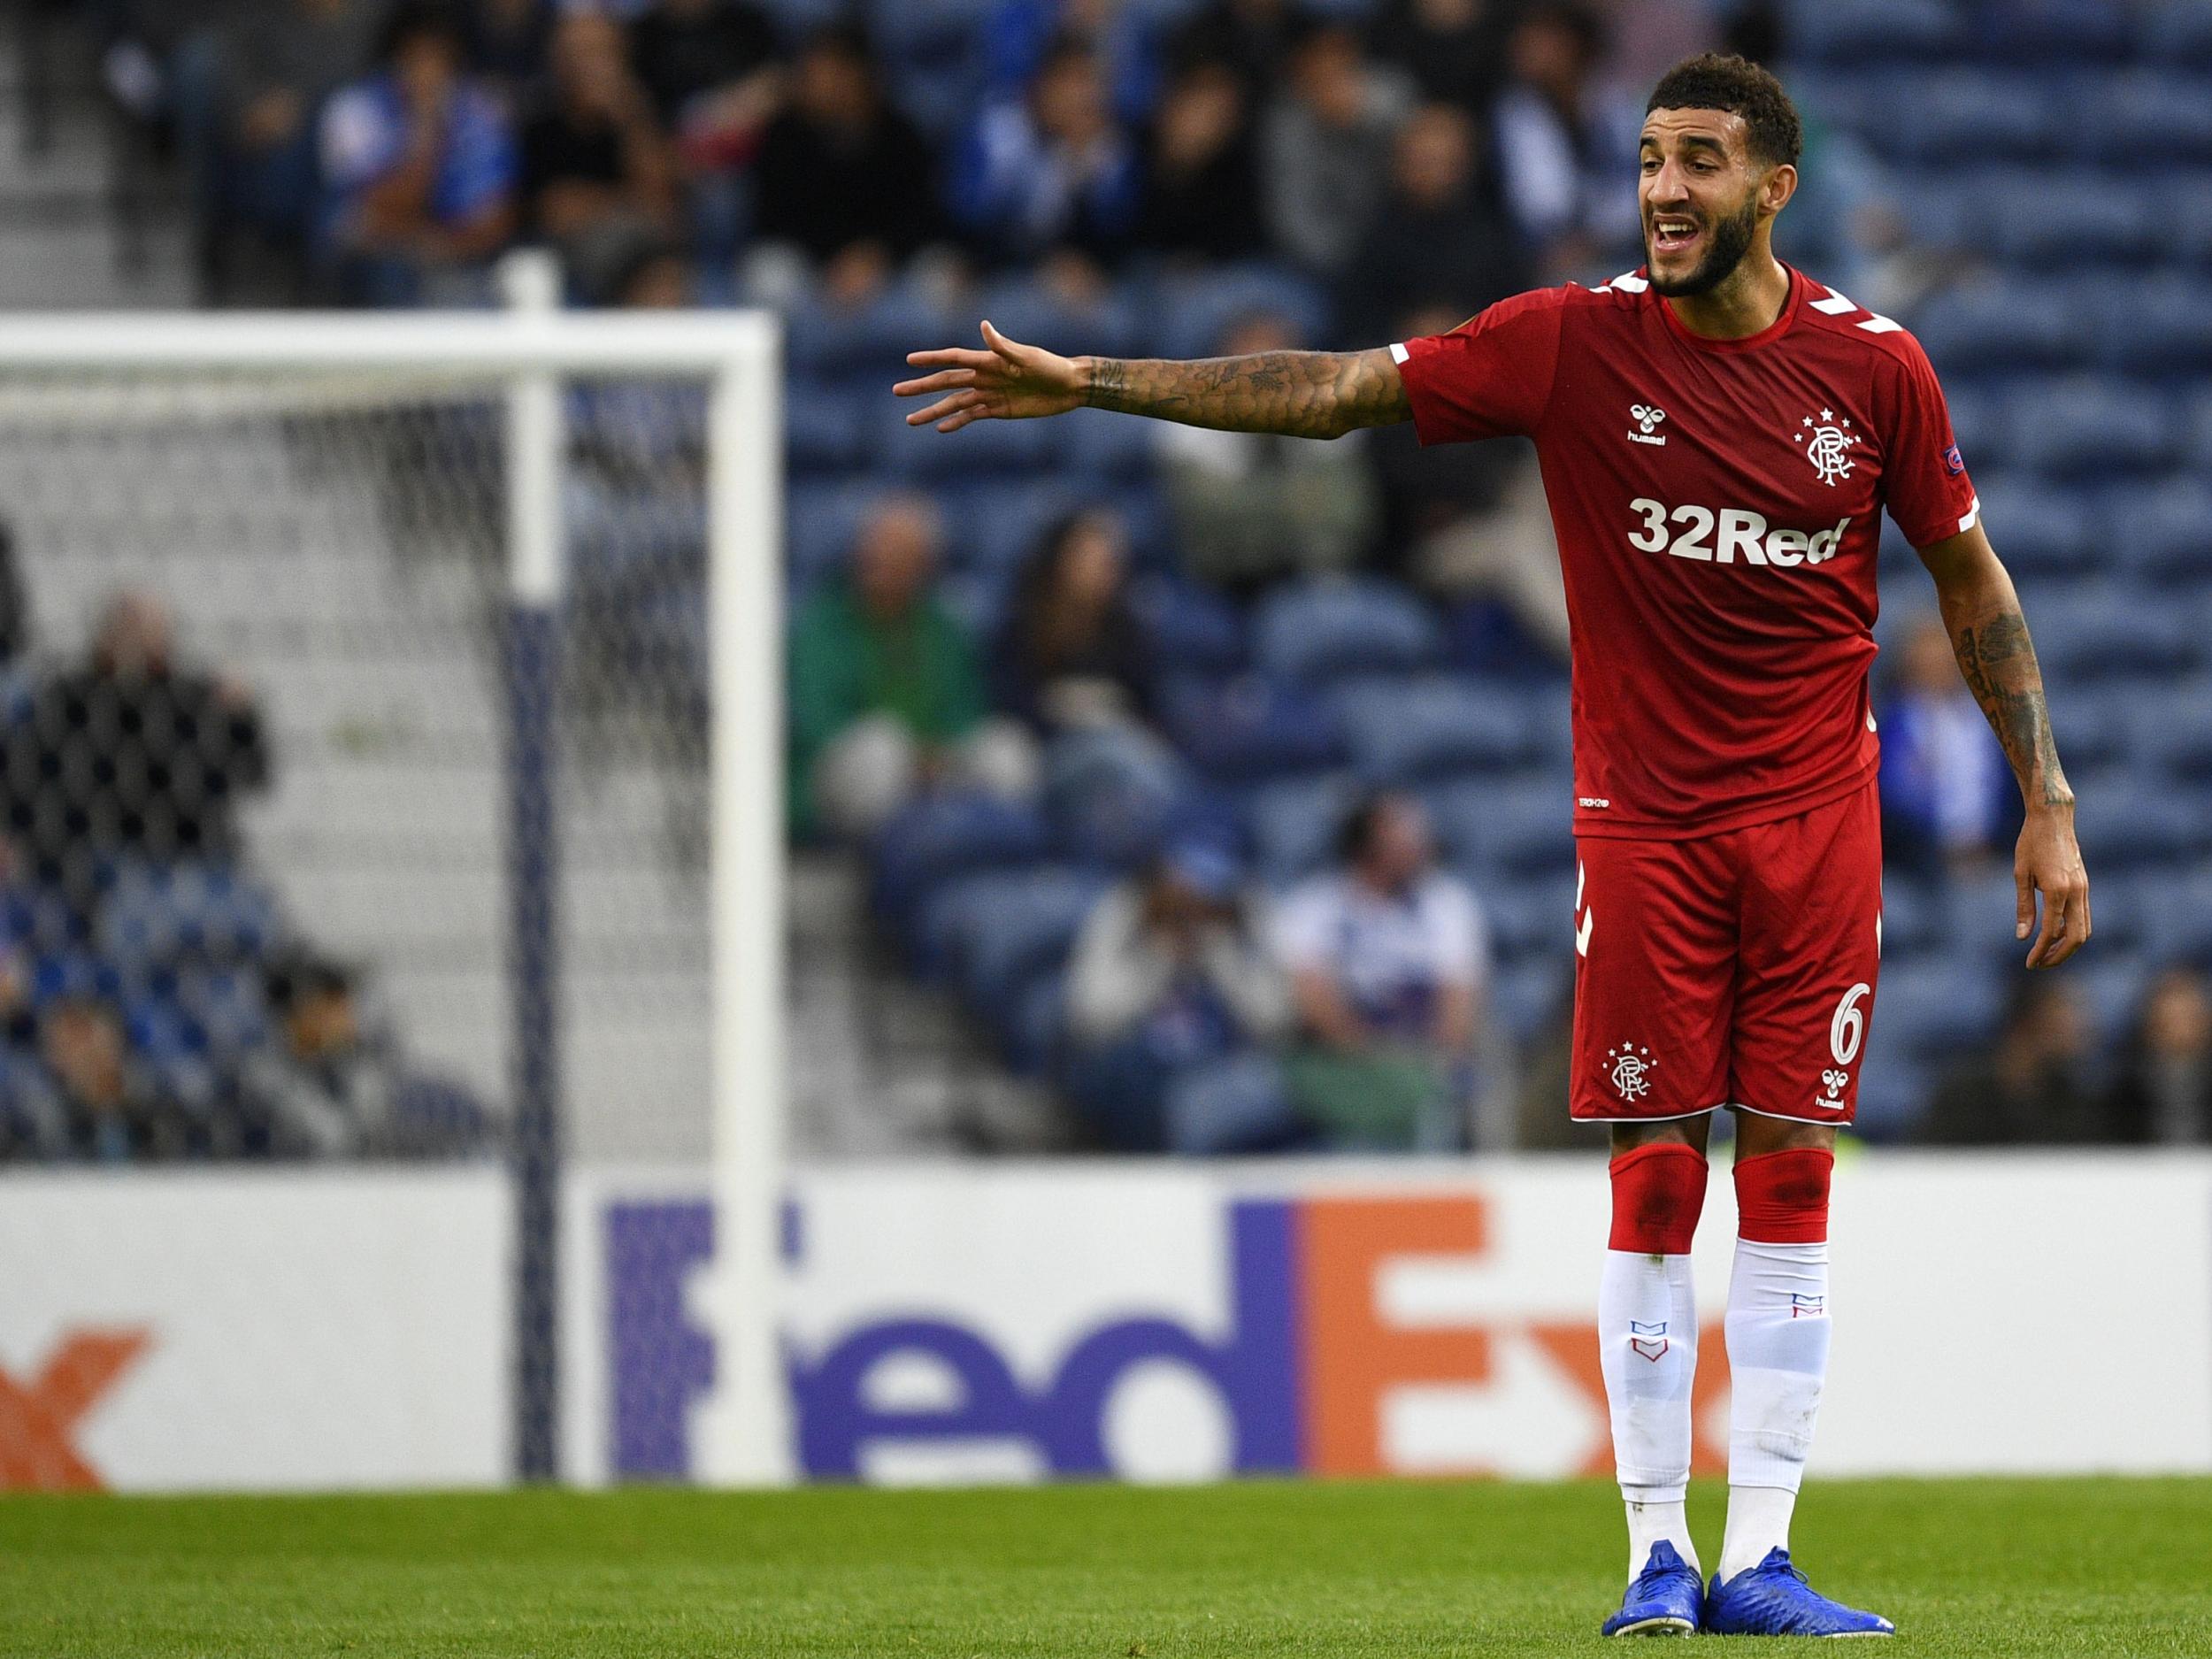 Defender Connor Goldson claimed he had a variety of objects thrown at him during the game